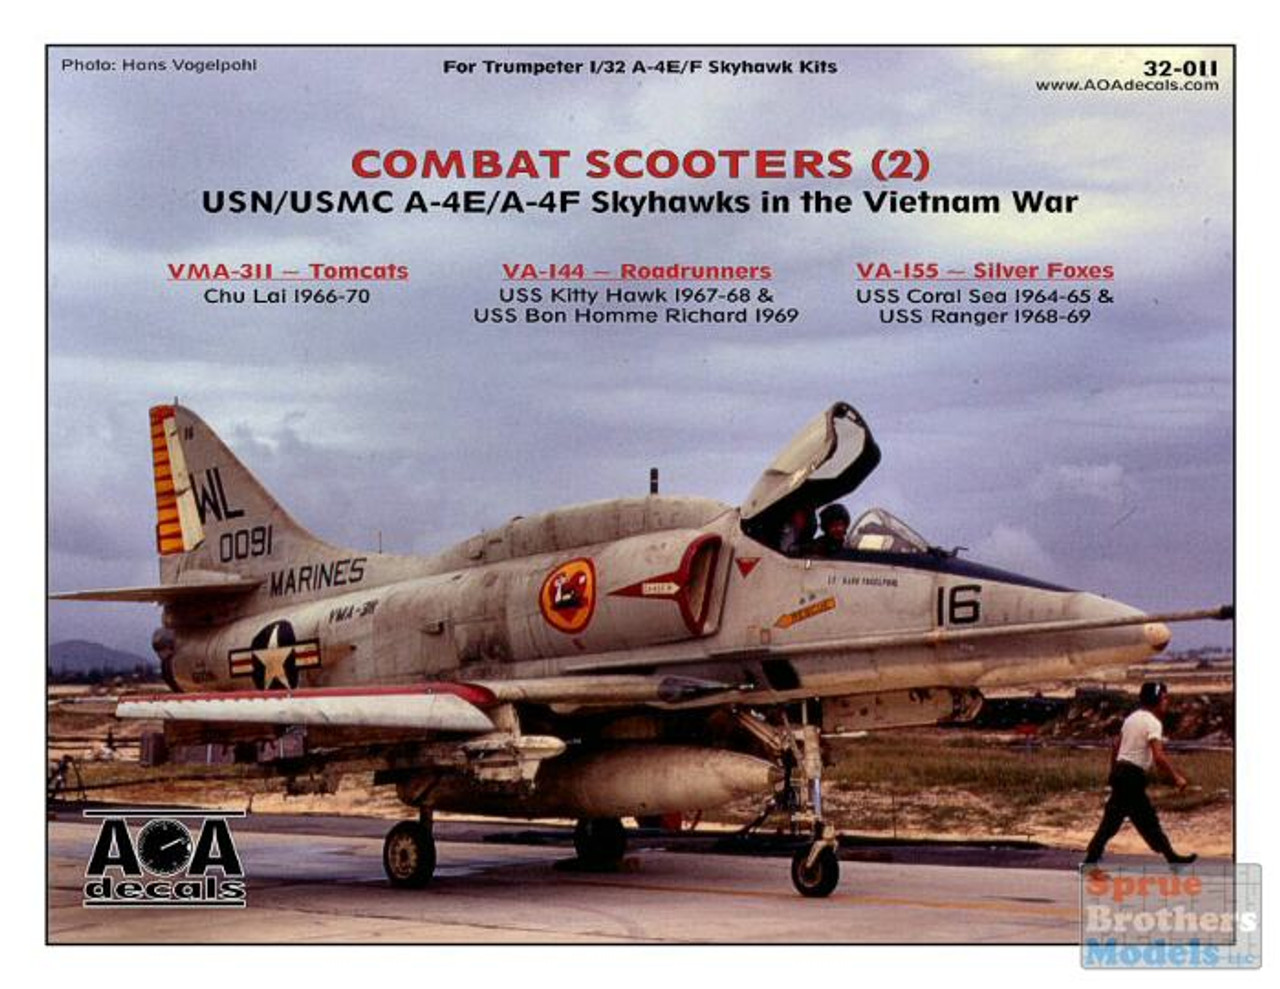 Decal 1/32 Combat Scooters (2) - USN/USMC Douglas A-4E/A-4F Skyhawks in the Vietnam War. This Part 2 (AOA Decals)